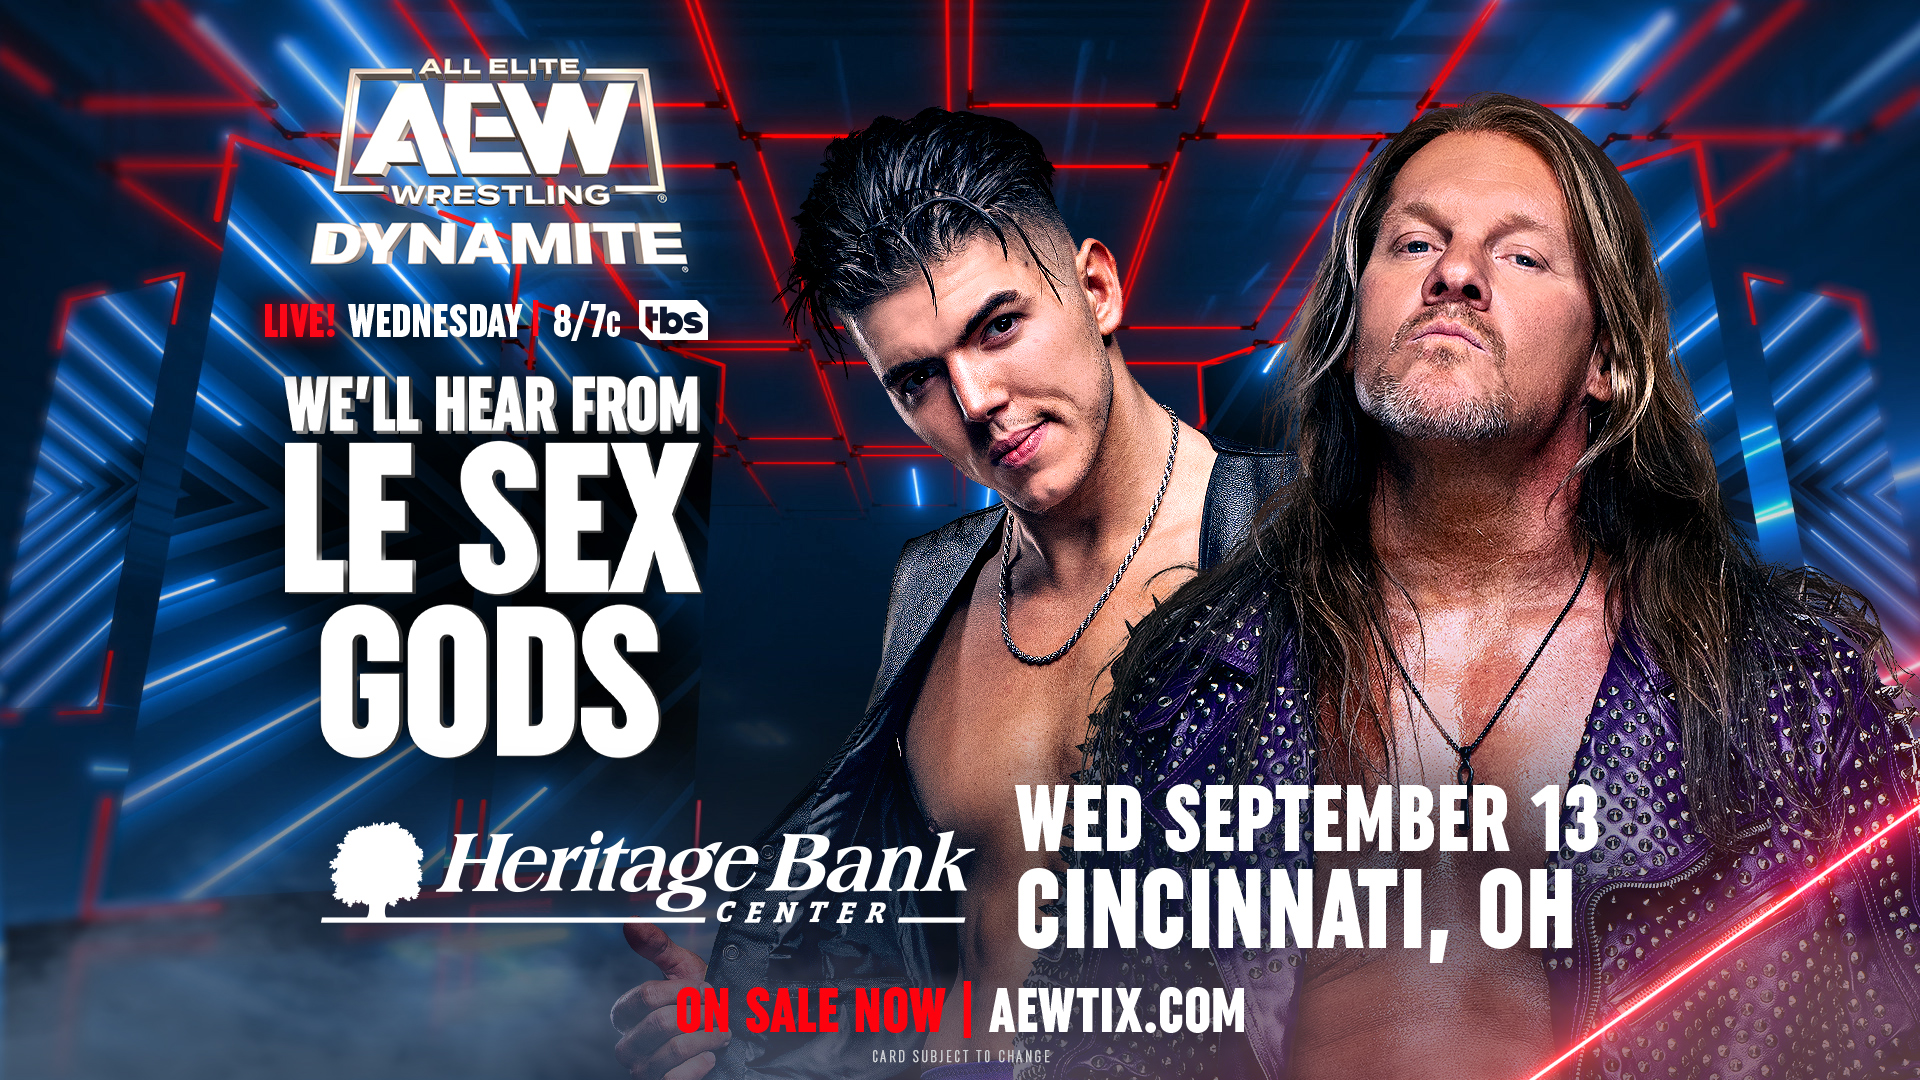 Segment With Le Sex Gods Announced For AEW Dynamite